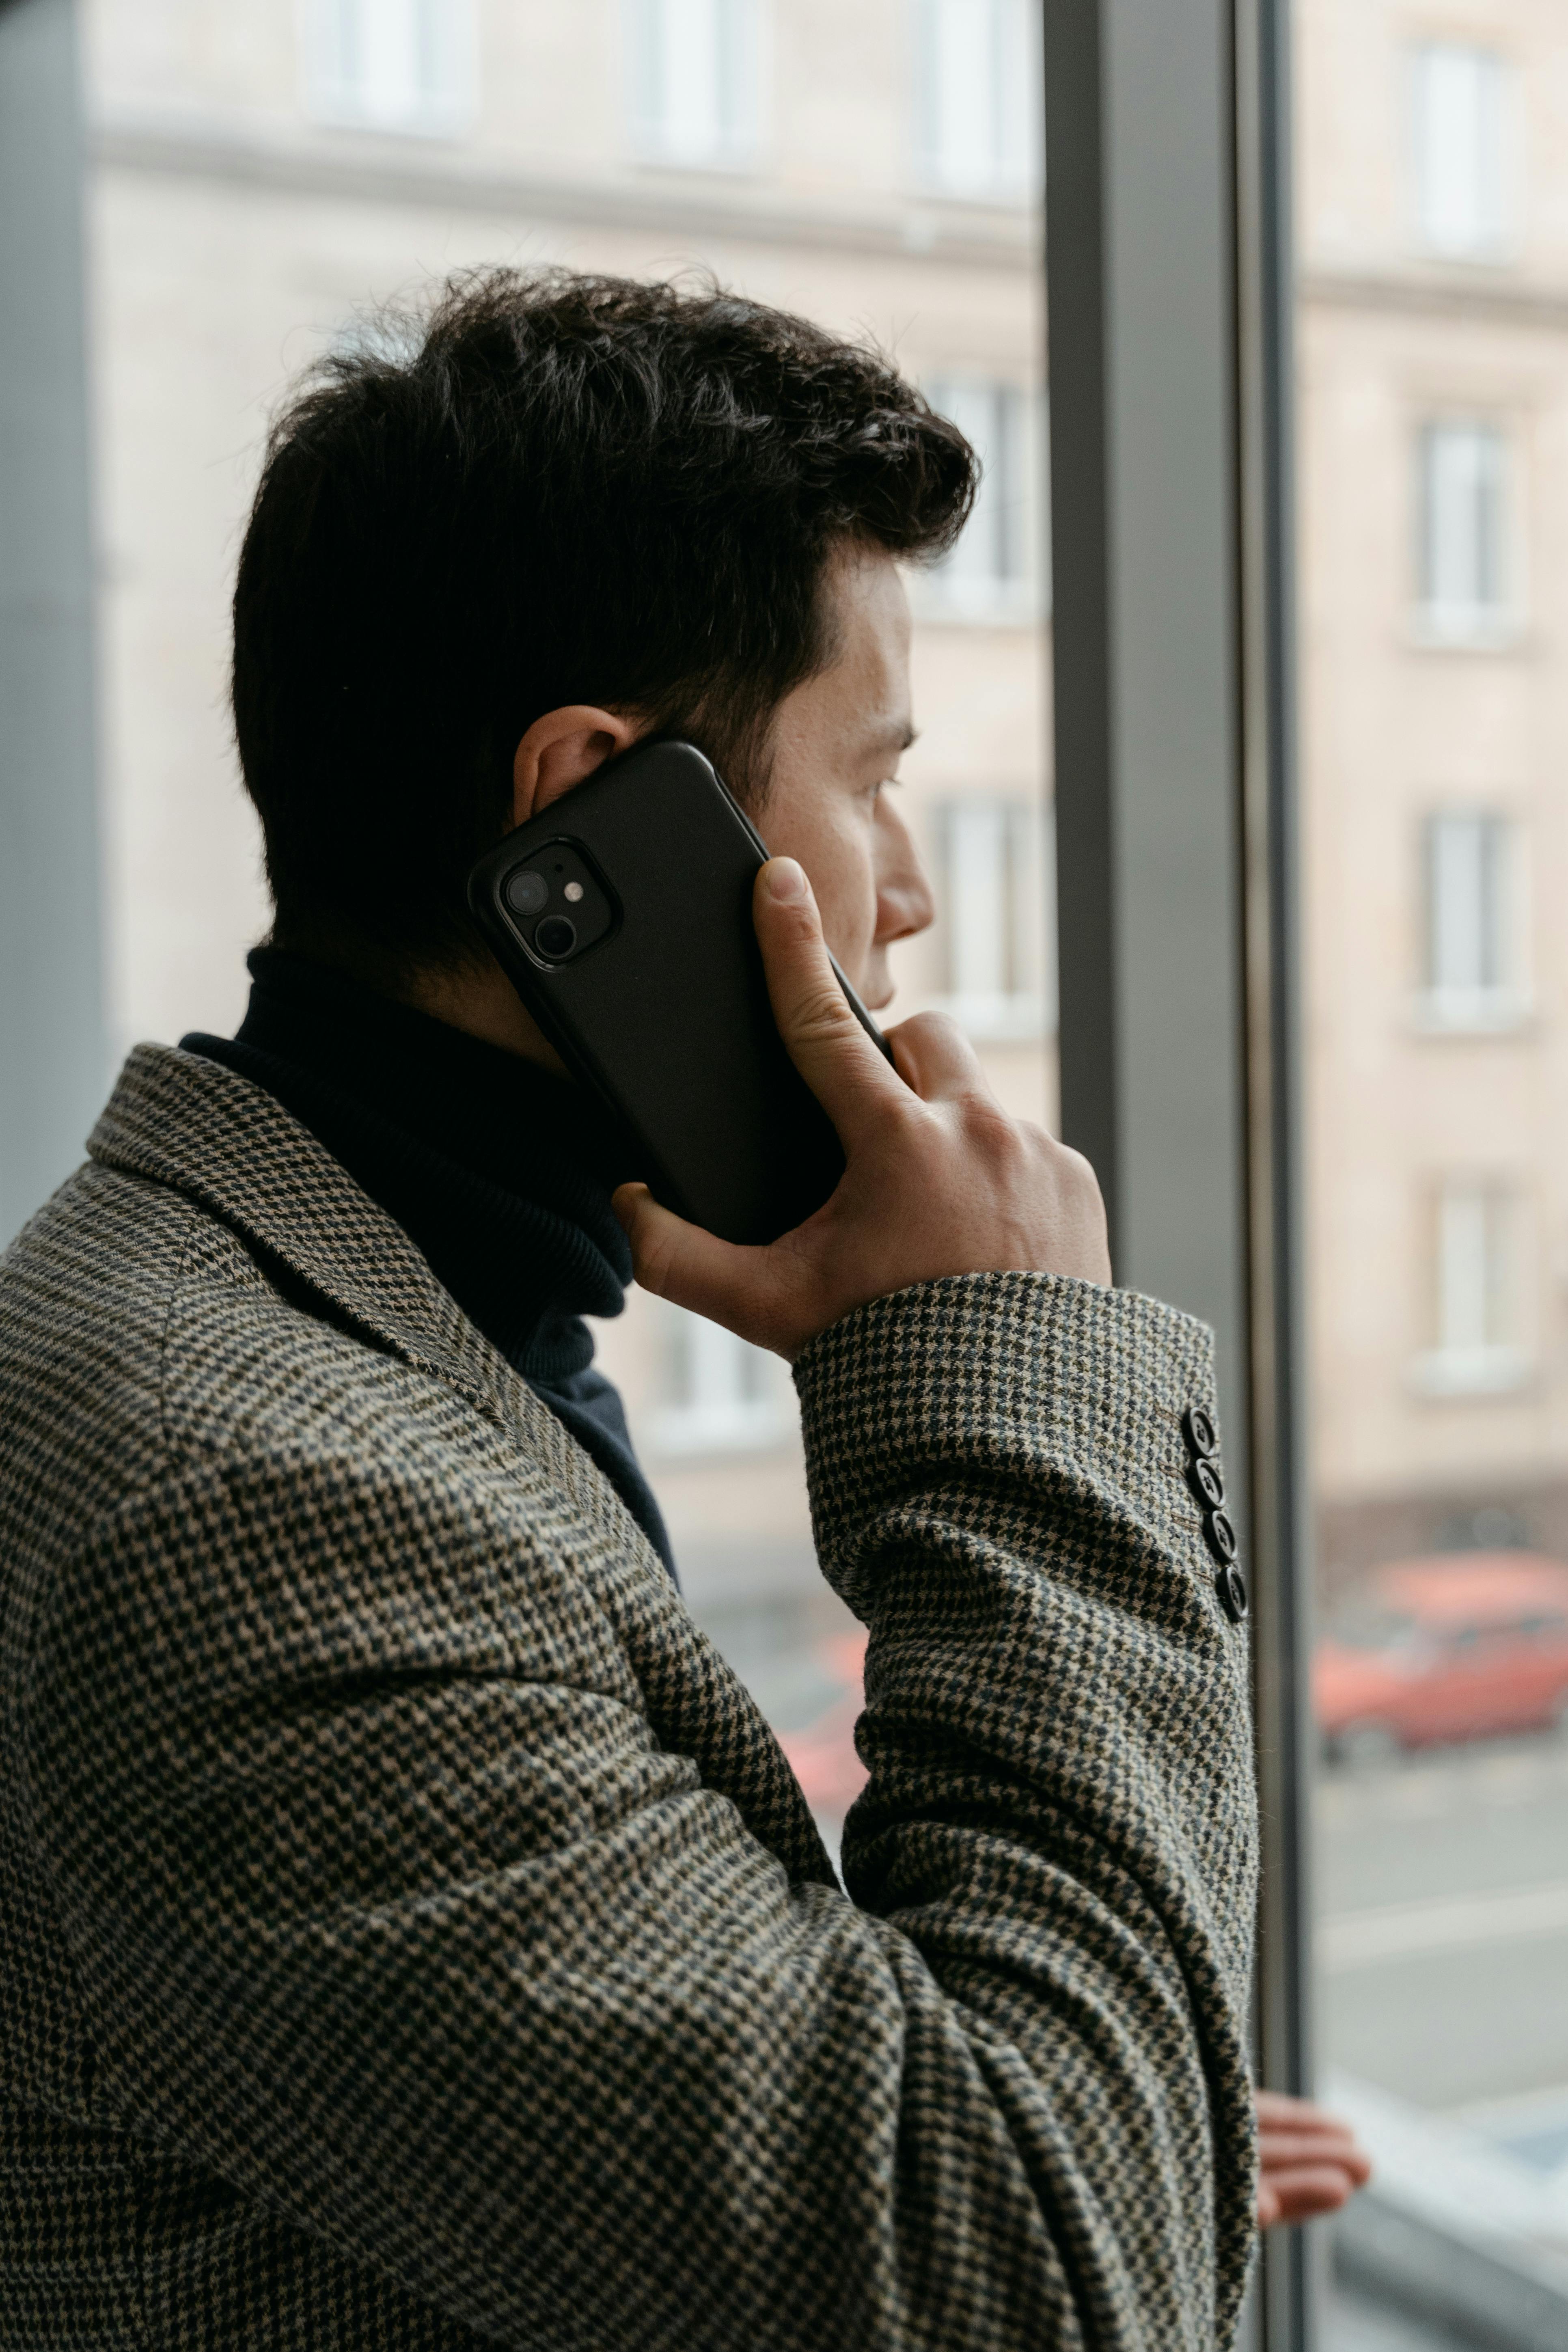 A man talking on his phone | Source: Pexels